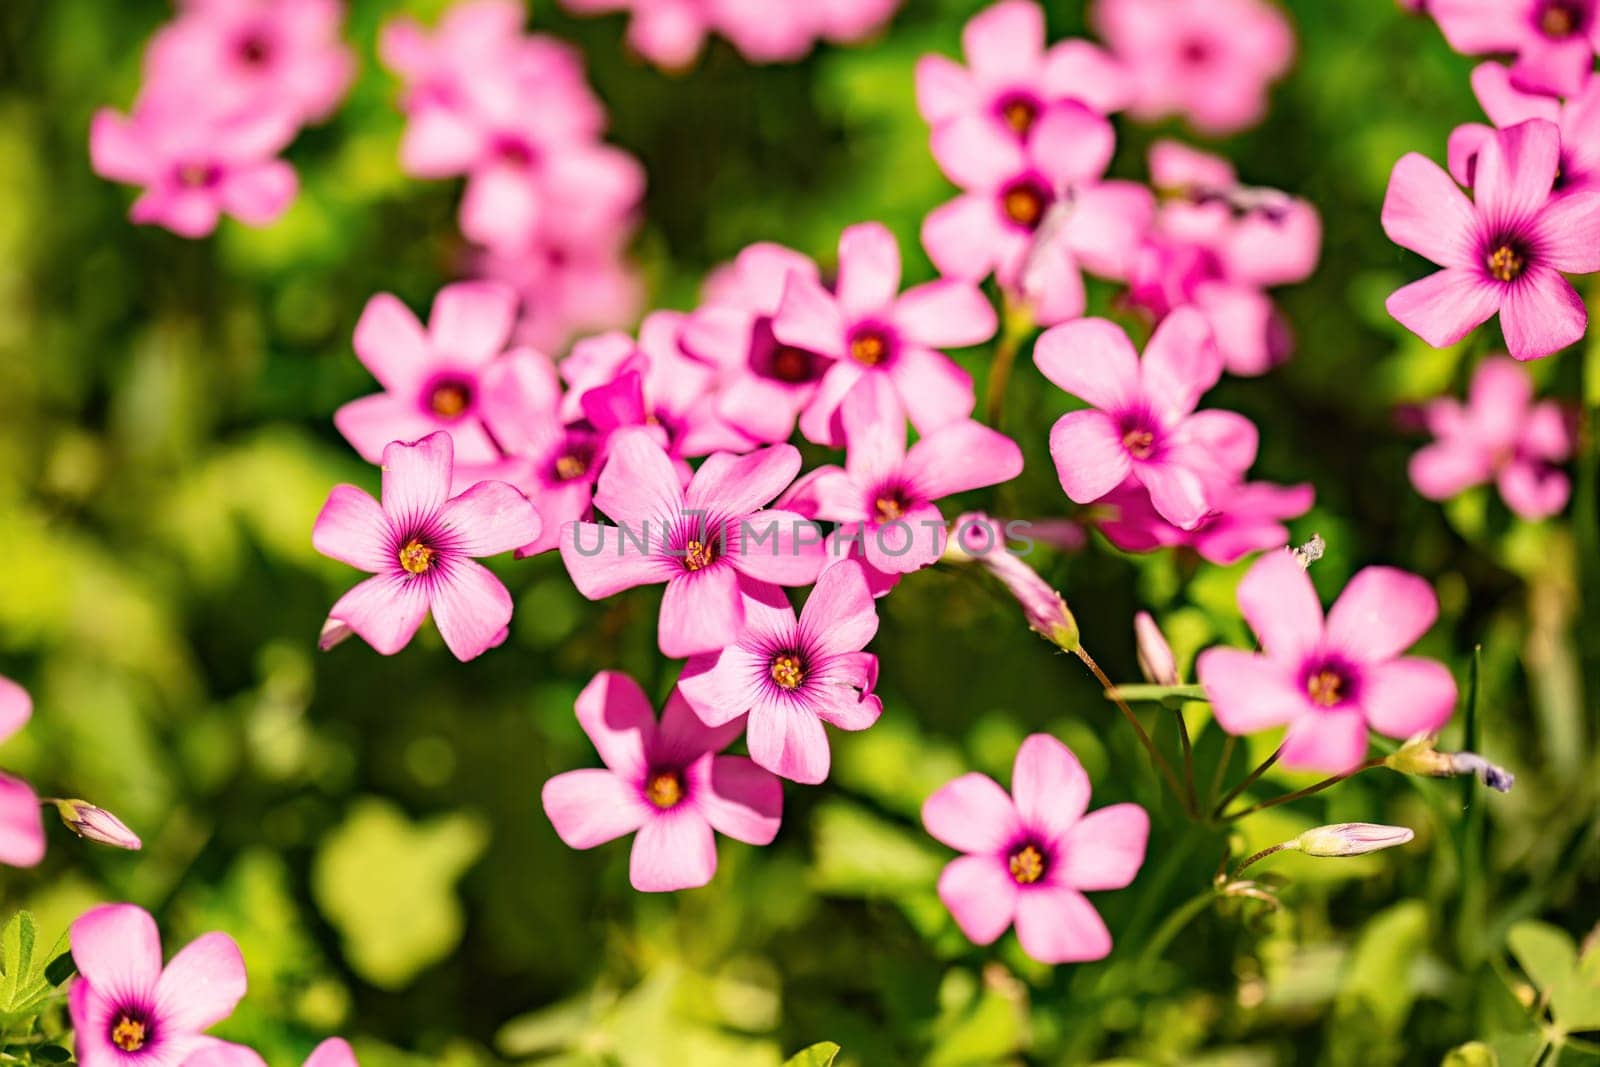 Oxalis articulata flowering on a vibrant spring meadow, showcasing delicate pink blooms.